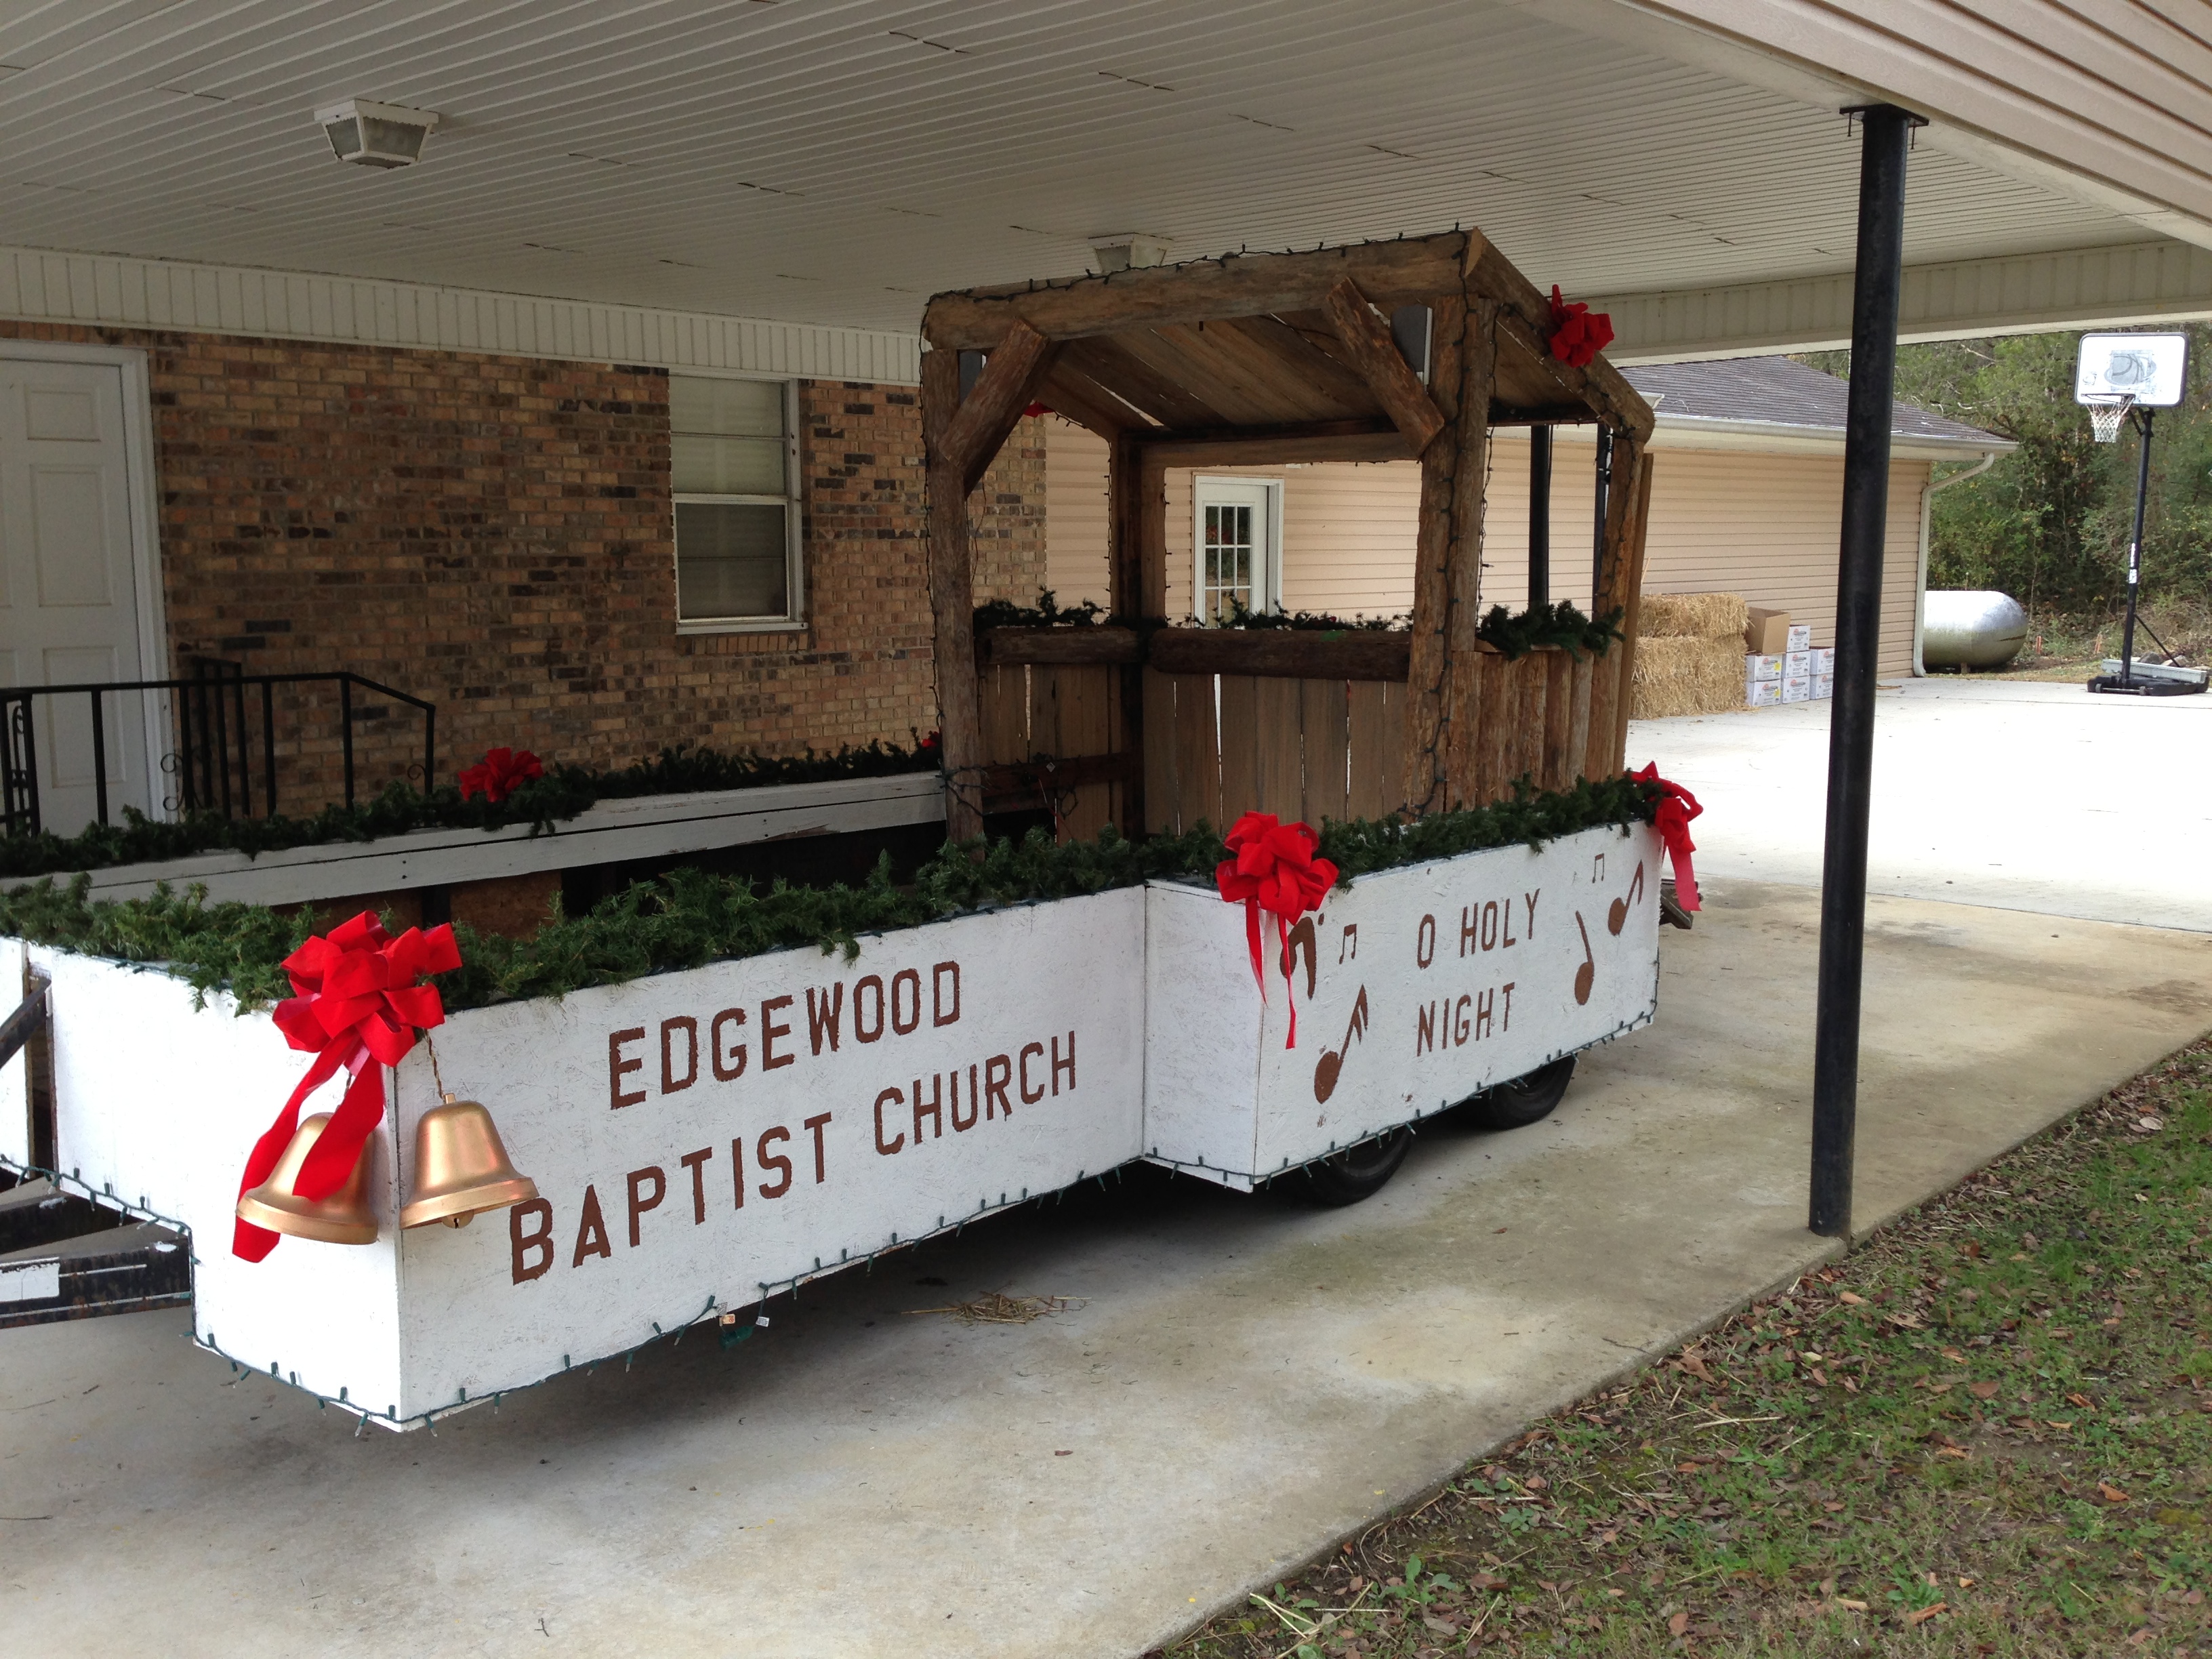 Our float for the Christmas parade